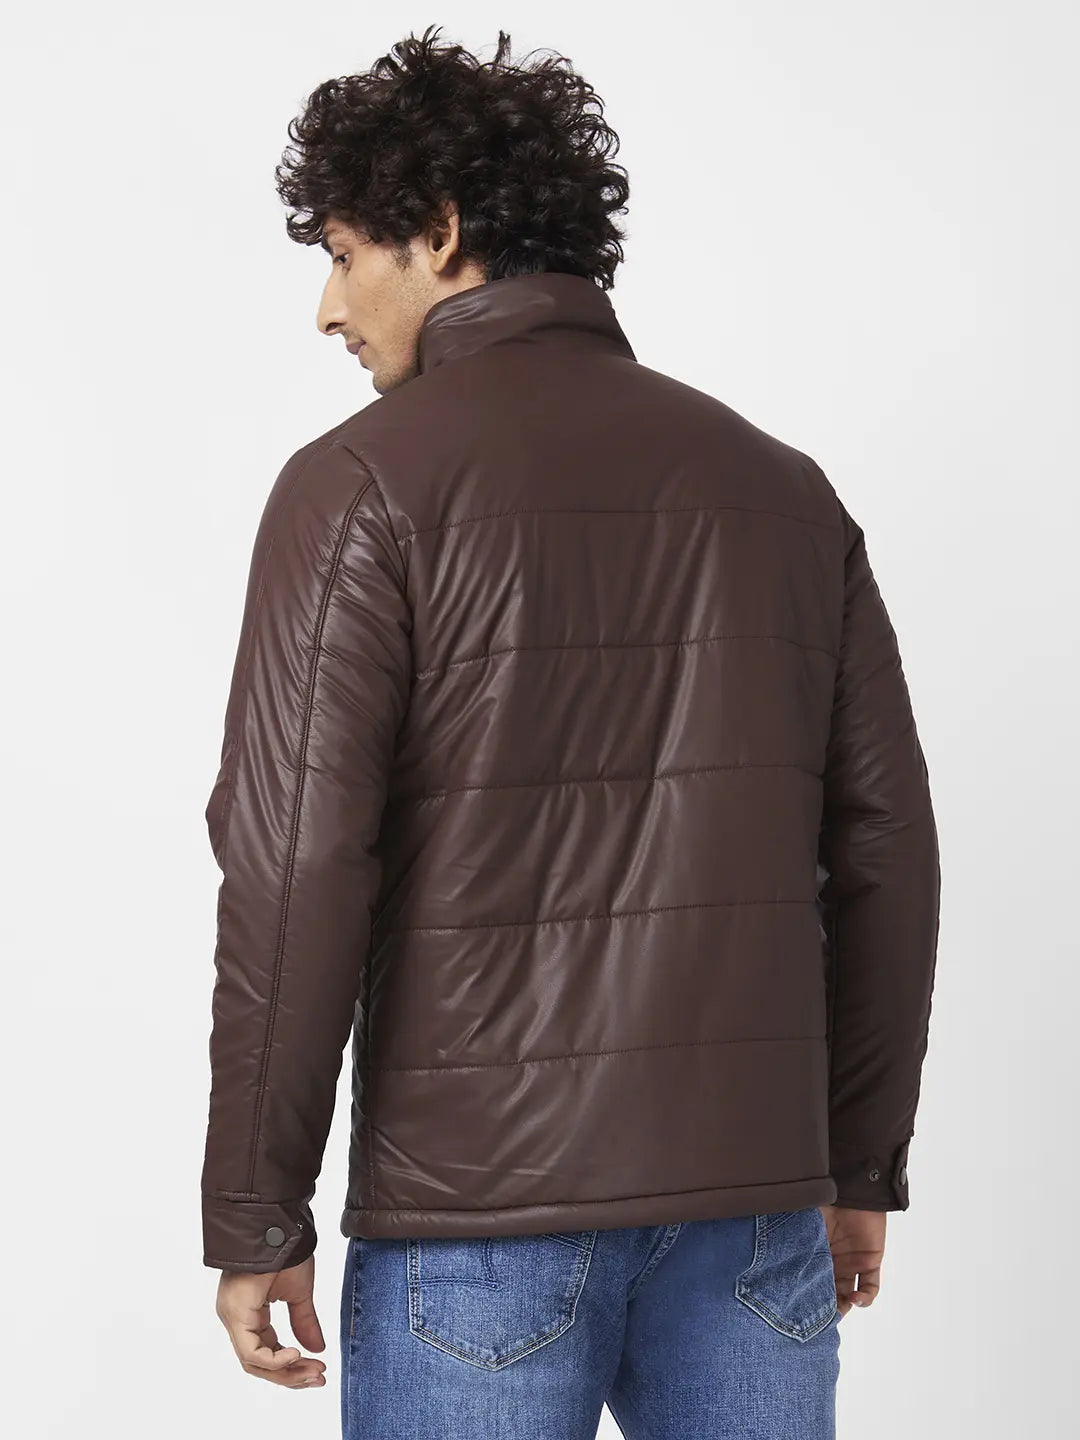 MEN'S LEATHER LOOK JACKET WITH CHEST SILICON BADGE